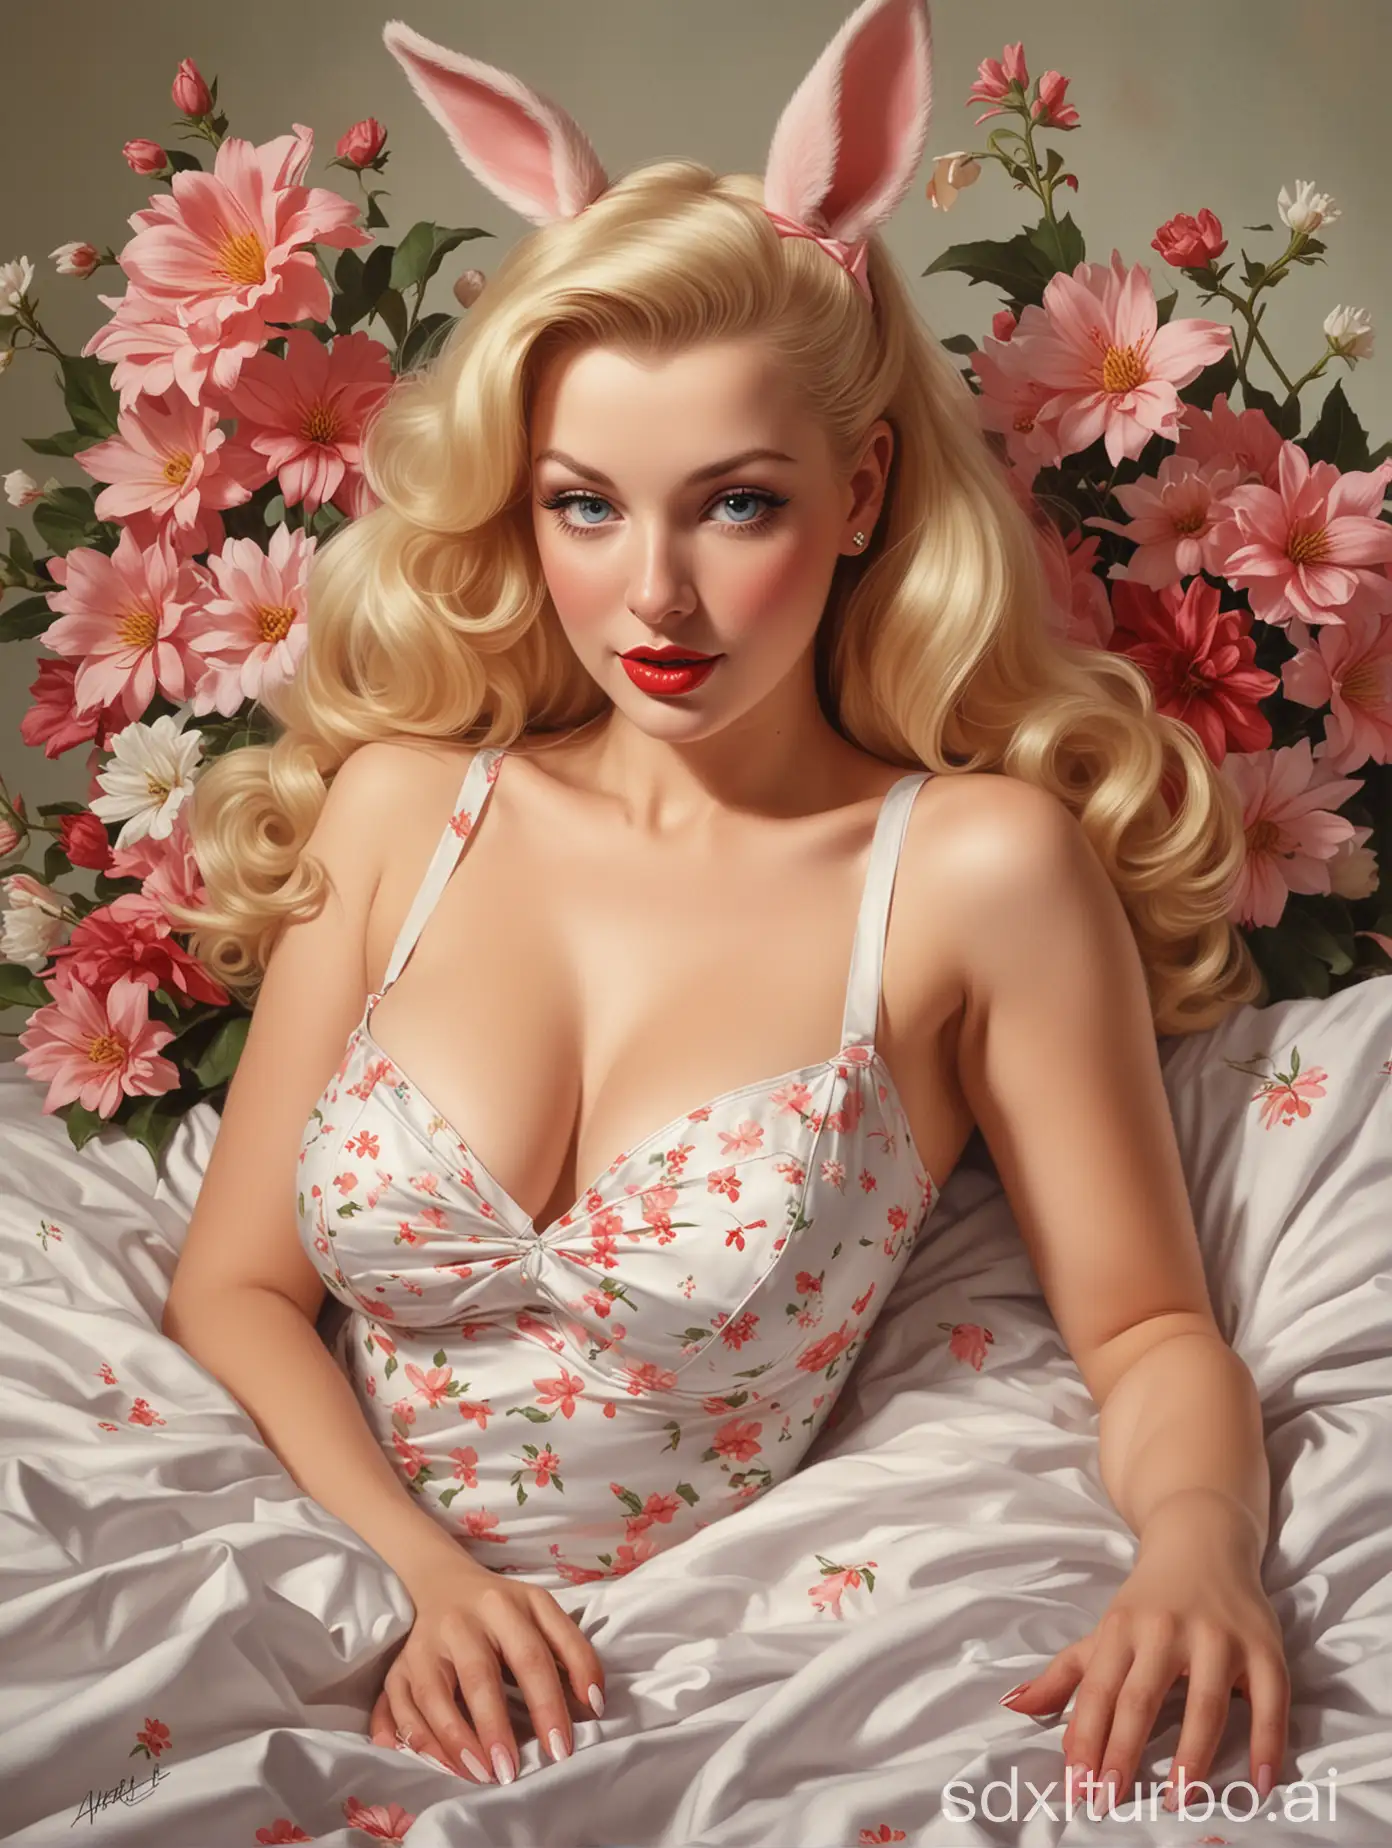 a painting of a woman dressed scantily , pin up style poster, painted by al buell, trademarks and symbols, girl in a bed of flowers, sexy girl with long blonde hair, ultrarealistic sweet bunny girl, 💋 💄 👠 👗, front page, cheeky devil, beautiful plans, petals, effervescent gil elvgren style, painted by al buell, artgerm, inspired by Gil Elvgren, by Joyce Ballantyne Brand, pinup art, by Alberto Vargas, pin-up poster girl, gill elvgren, vintage pin up, pin - up girl